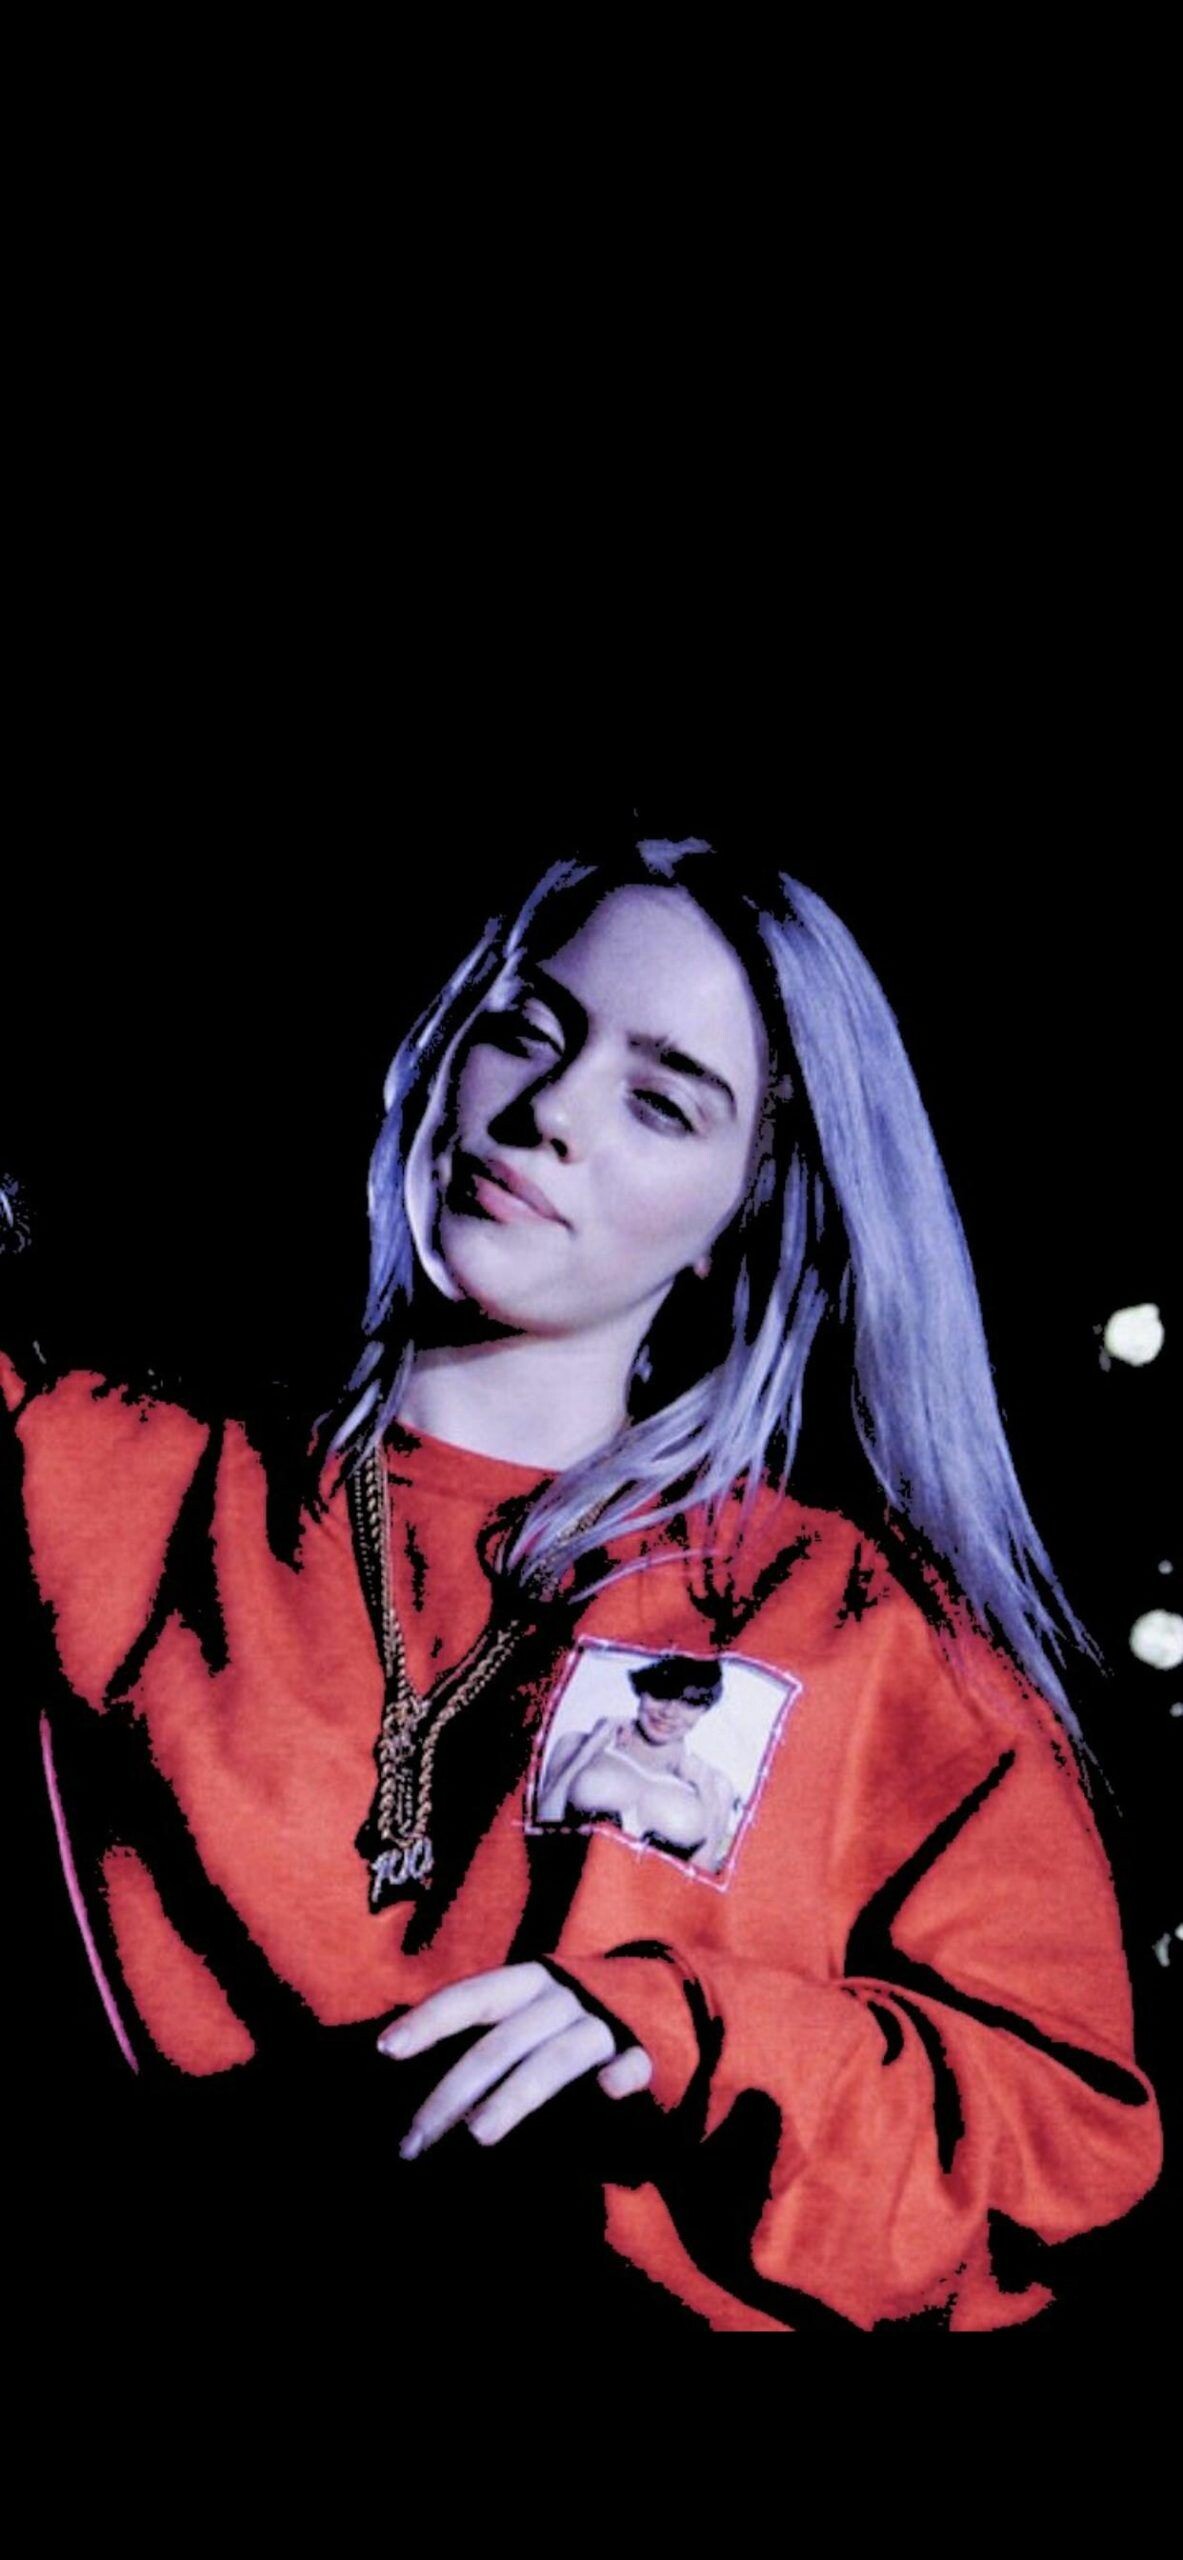 Billie Eilish: The youngest musician to have ever performed the theme song for a Bond film. 1190x2560 HD Wallpaper.